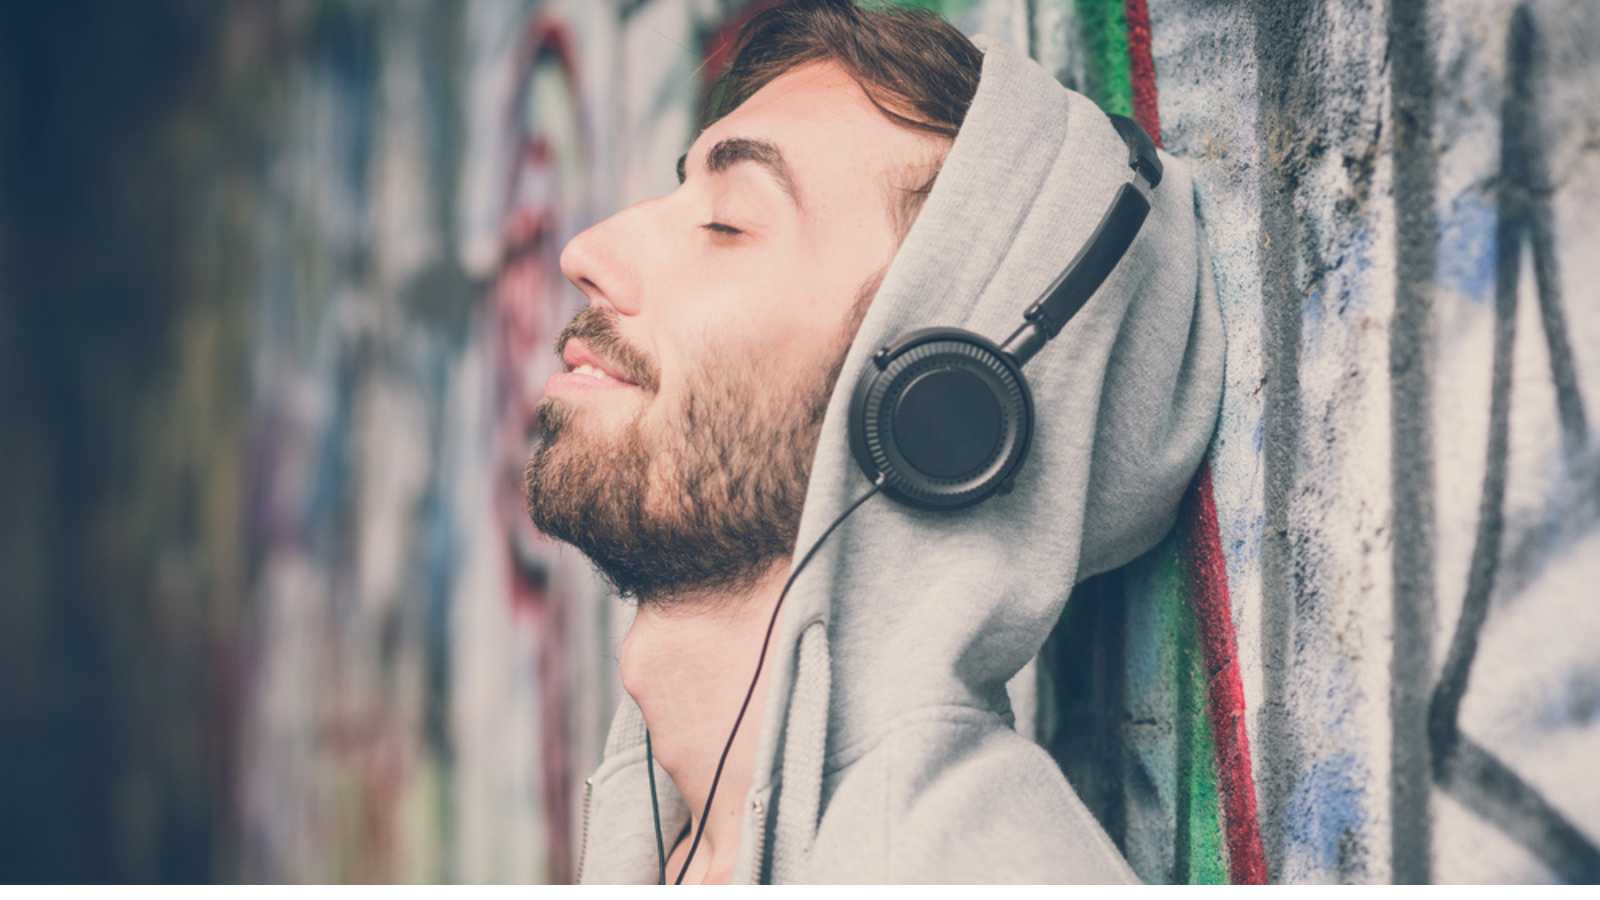 Man Listening To Music Outdoors